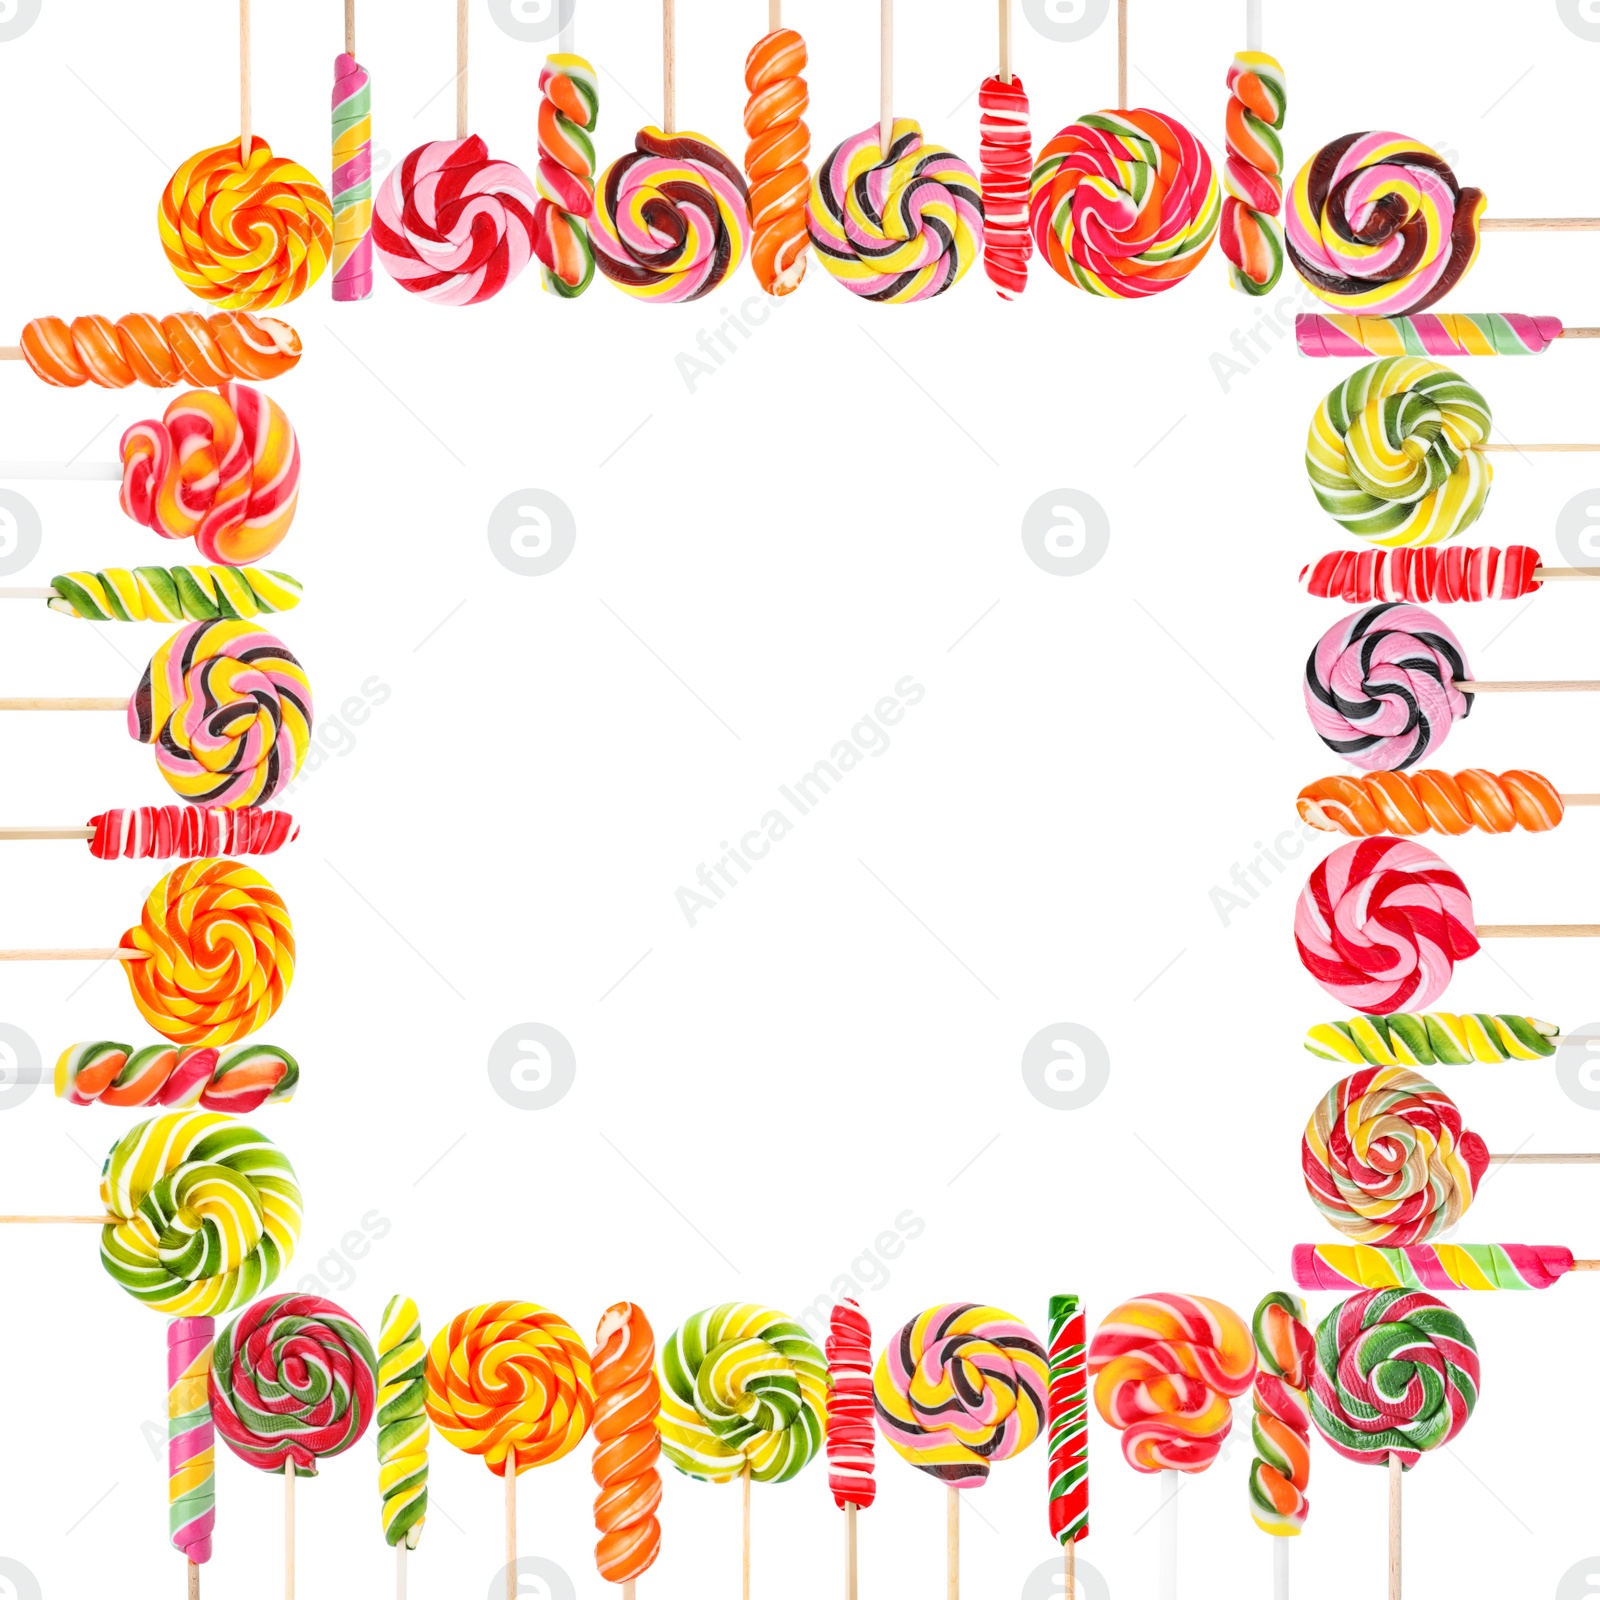 Image of Frame of different sweet candies on white background